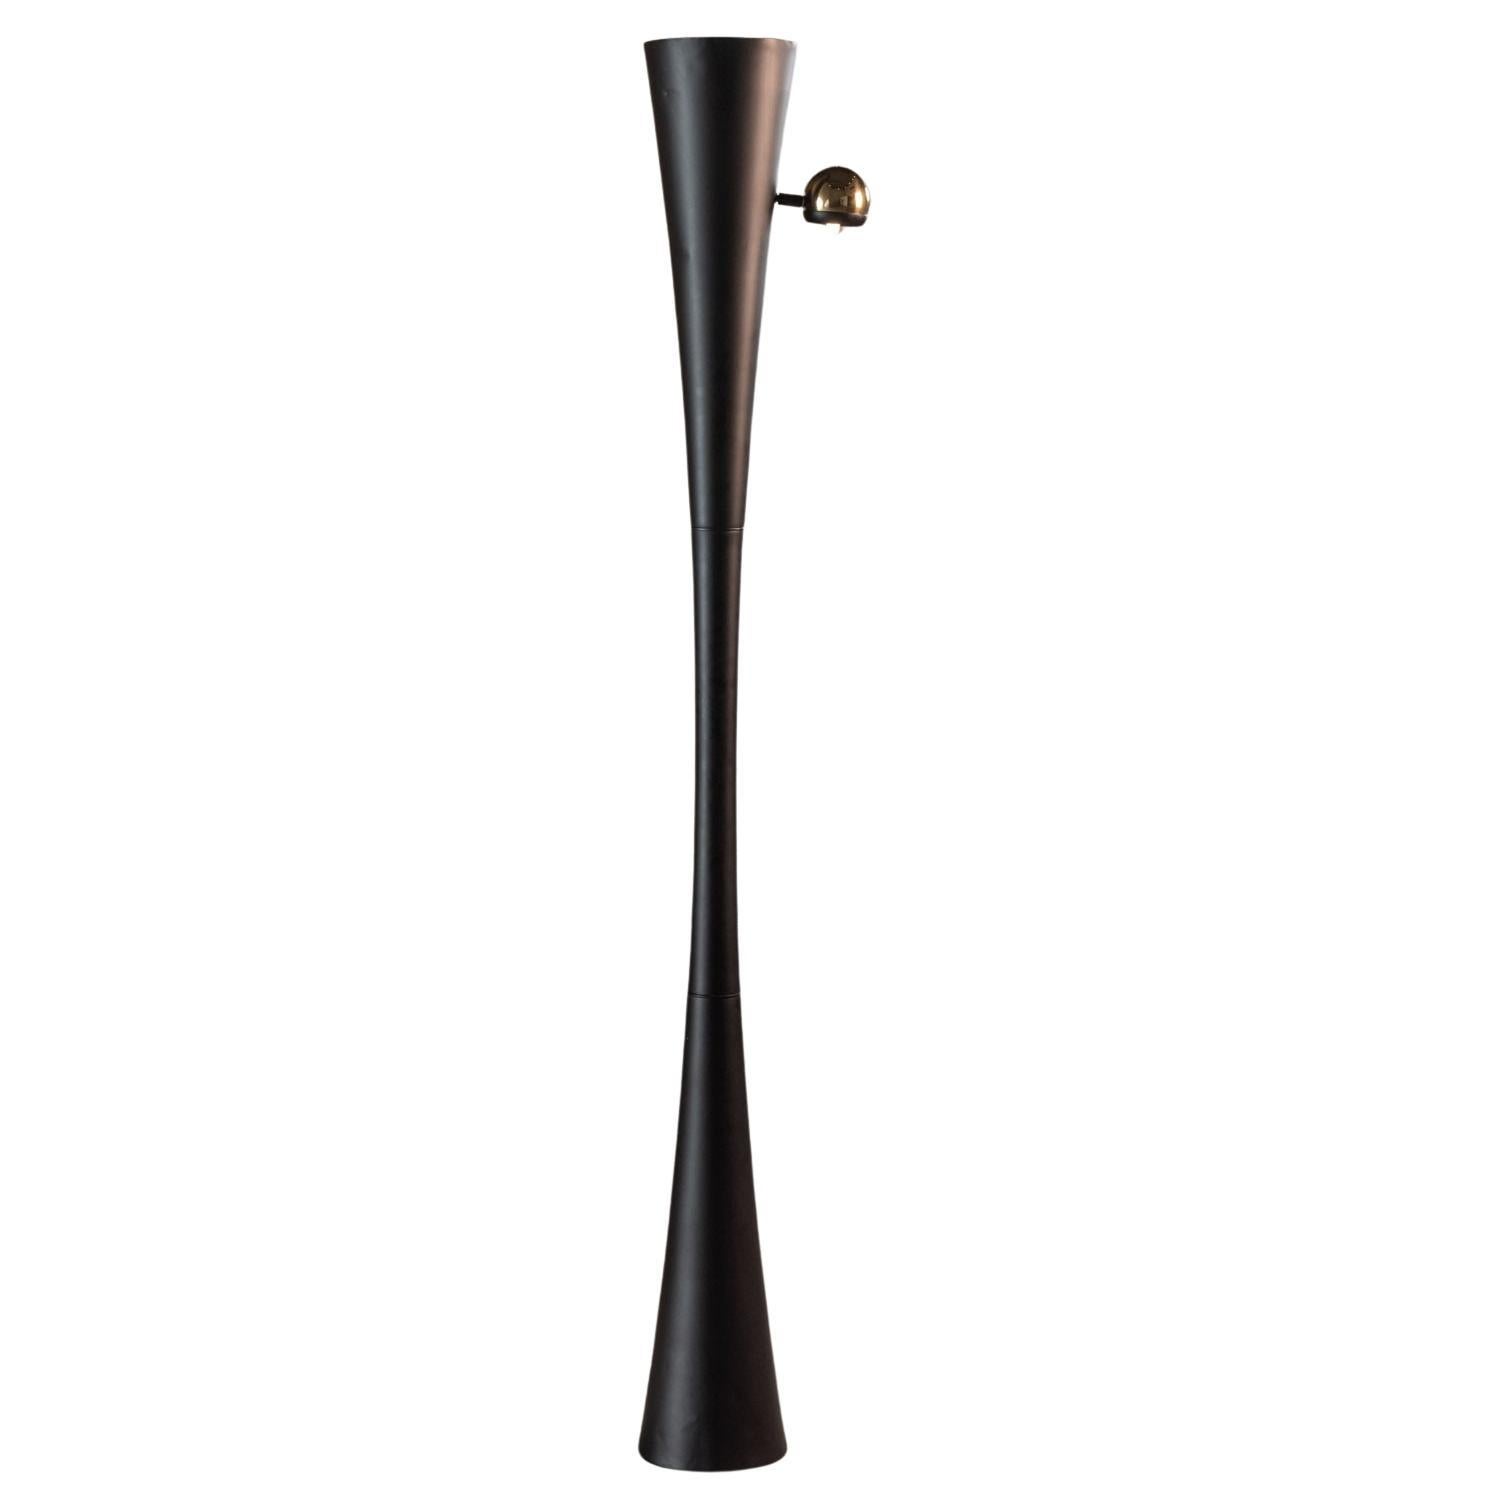 Floor Lamp in Brass and Steel, by Dominici, Mid-Century Brazilian Design Modern For Sale